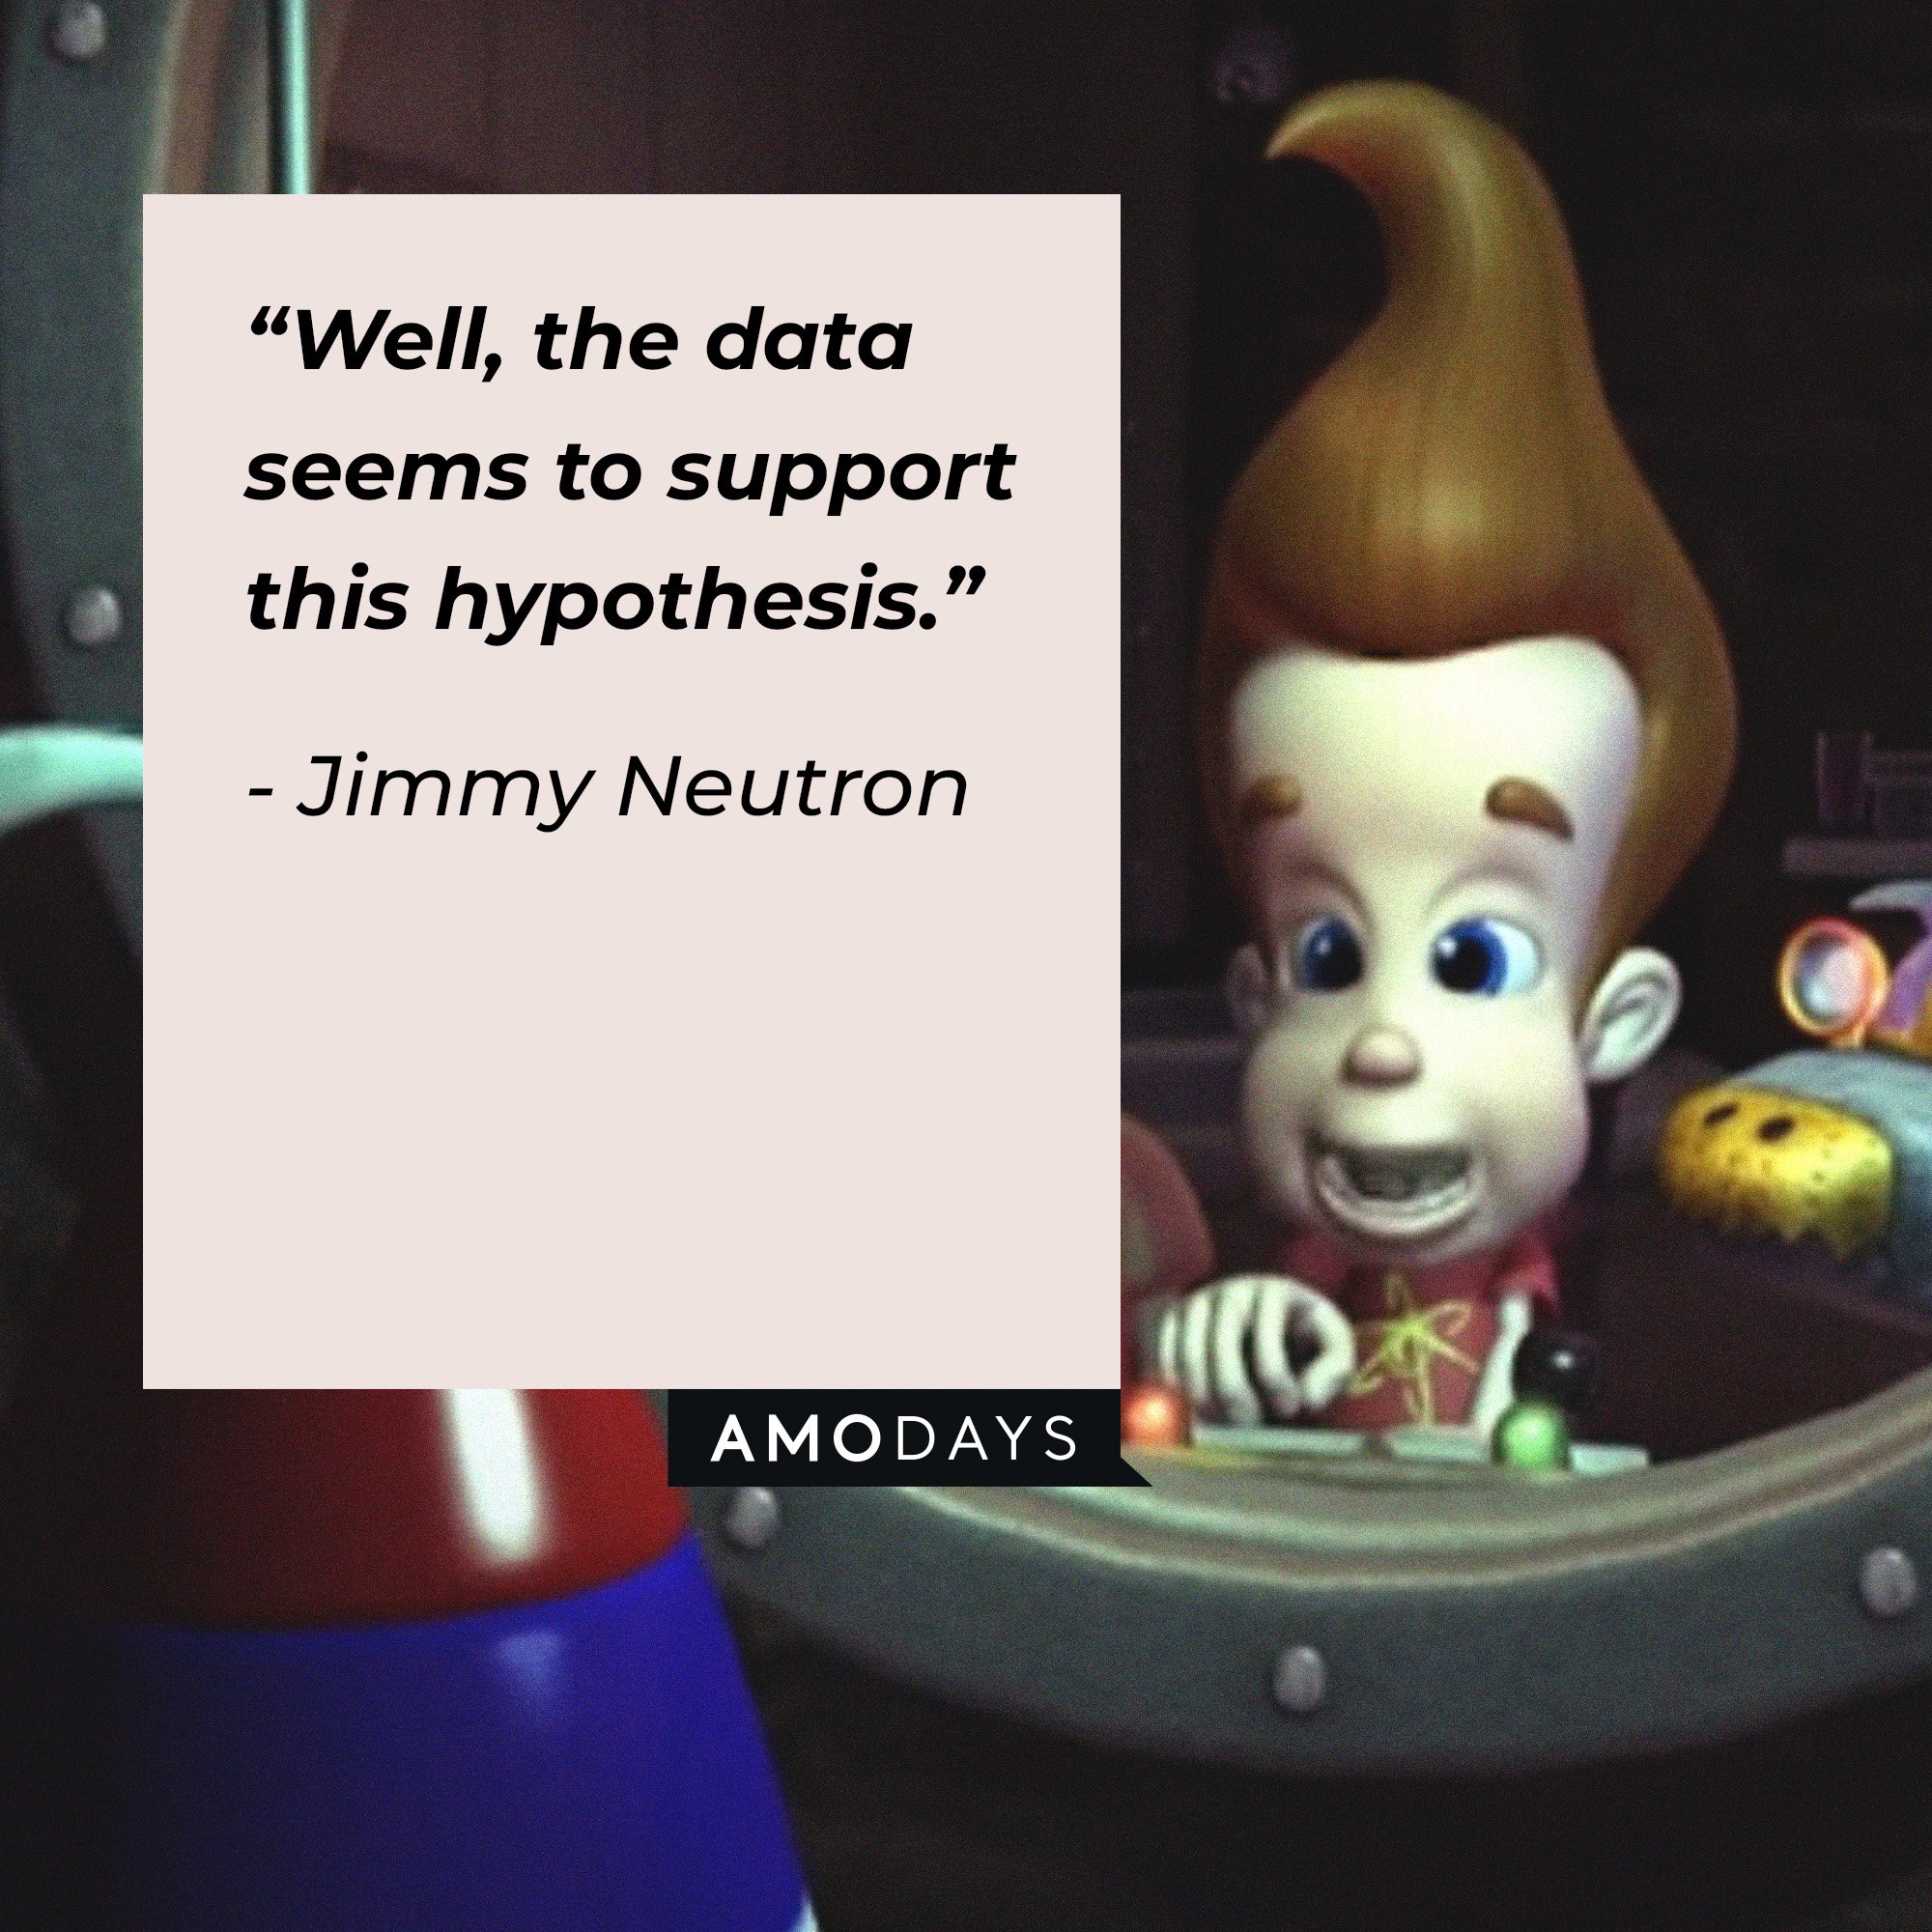 Jimmy Neutron’s quote: "Well, the data seems to support this hypothesis." | Image: AmoDays